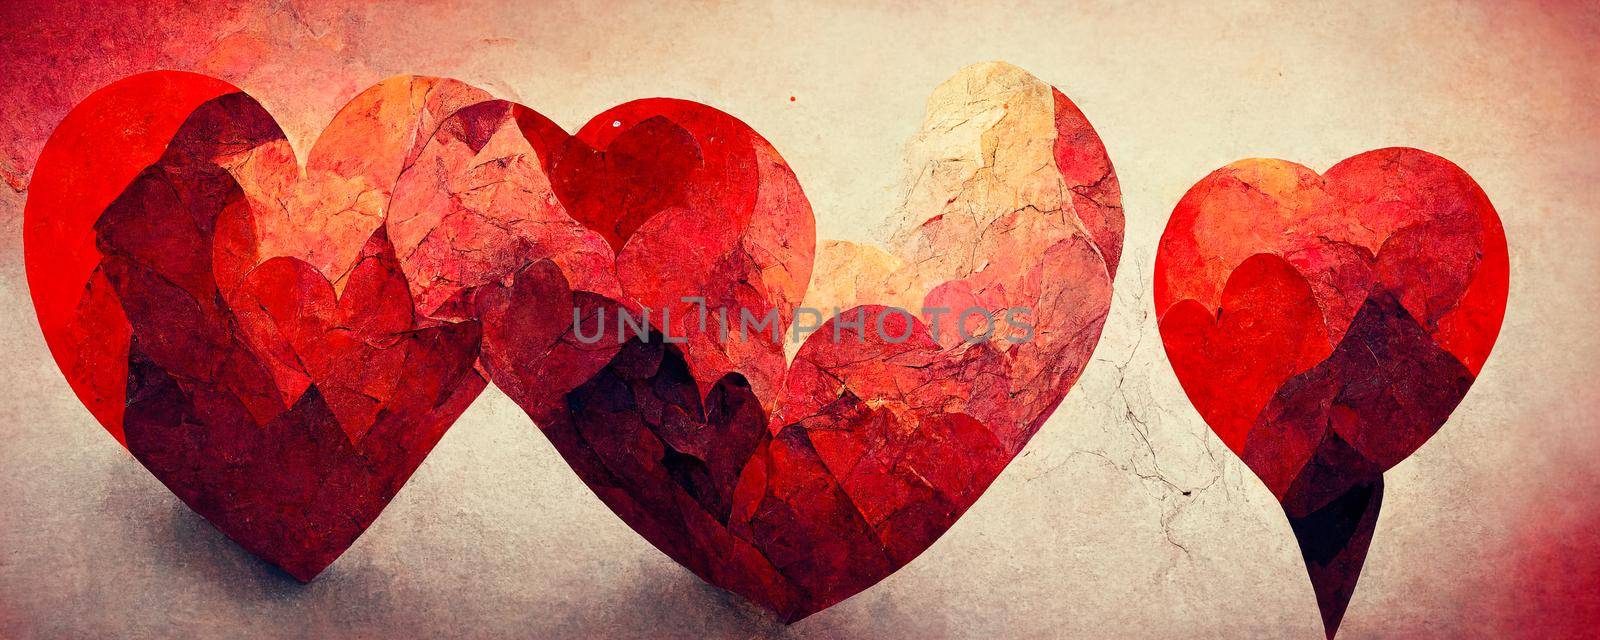 three hearts, Colorful abstract wallpaper texture background illustration by TRMK